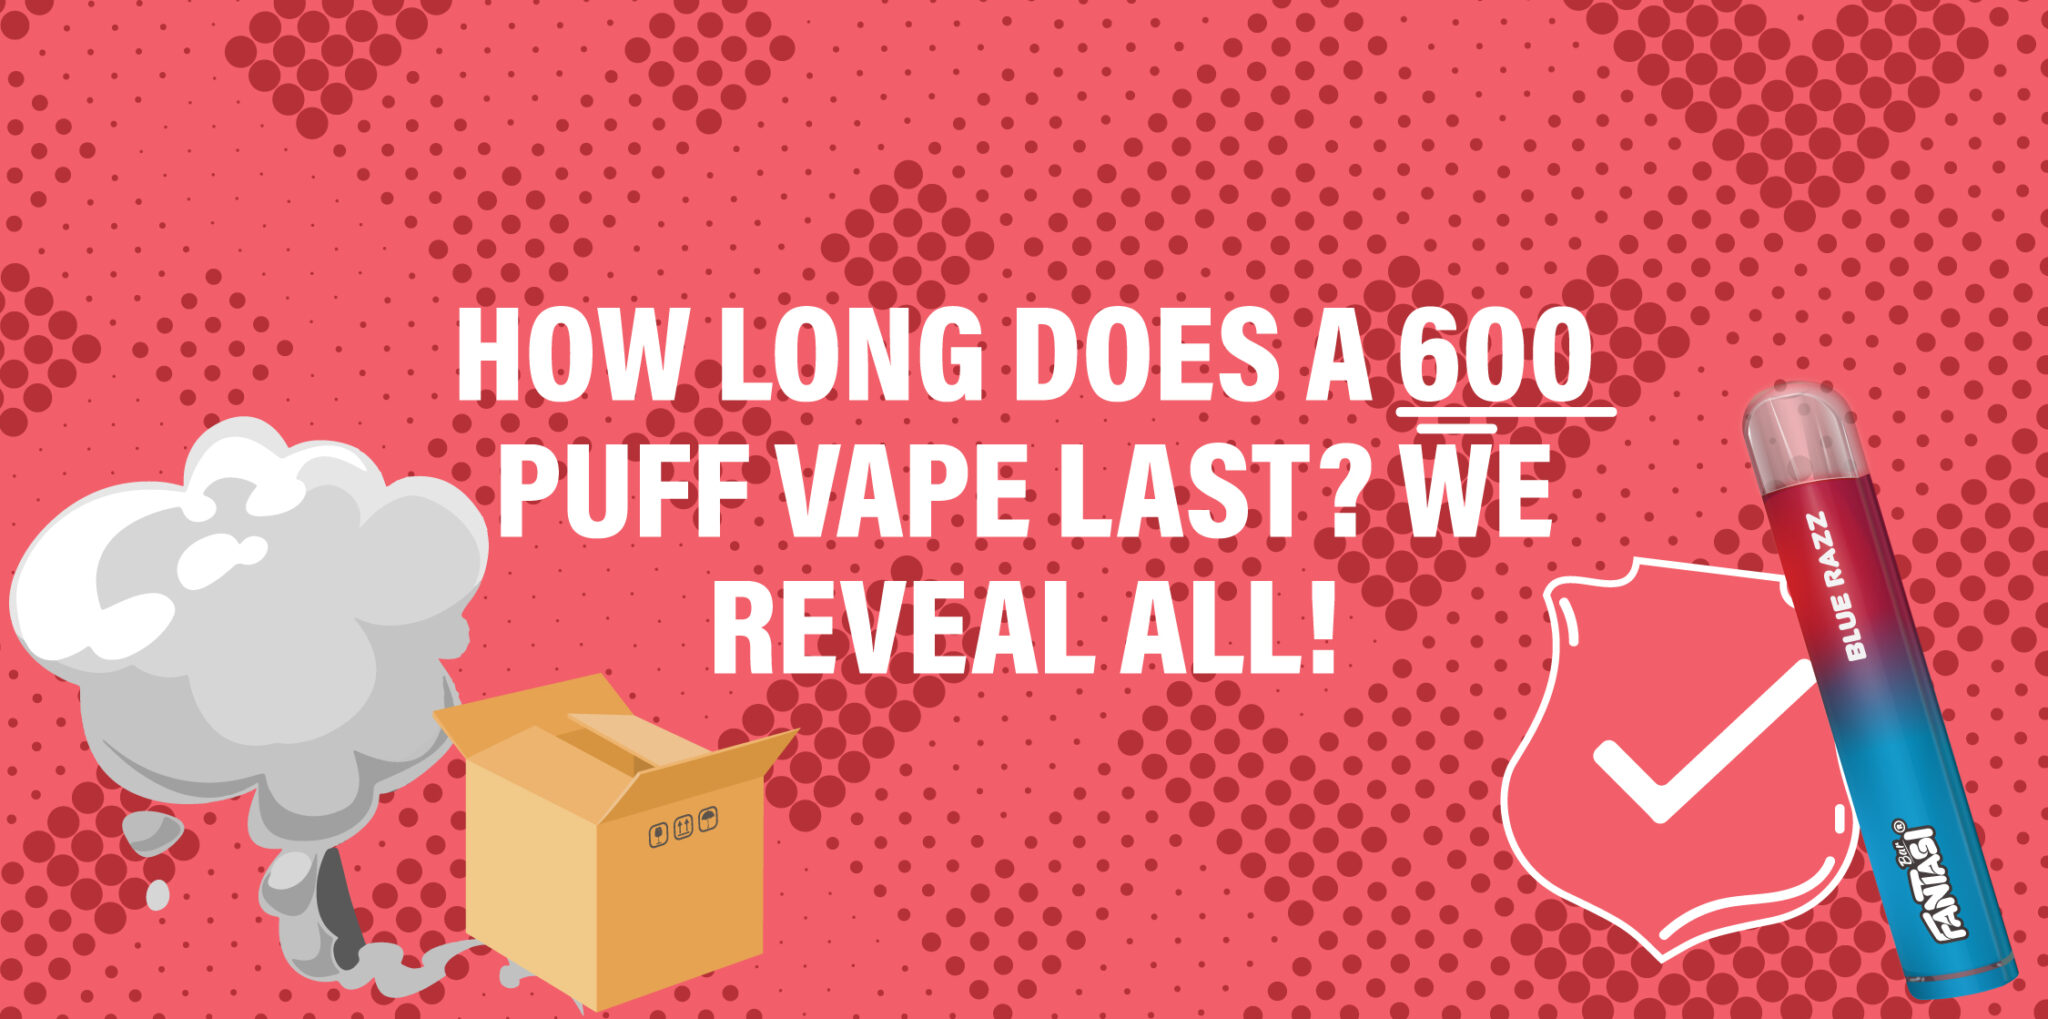 How Long Does a 600 Puff Vape Last? We Reveal All!